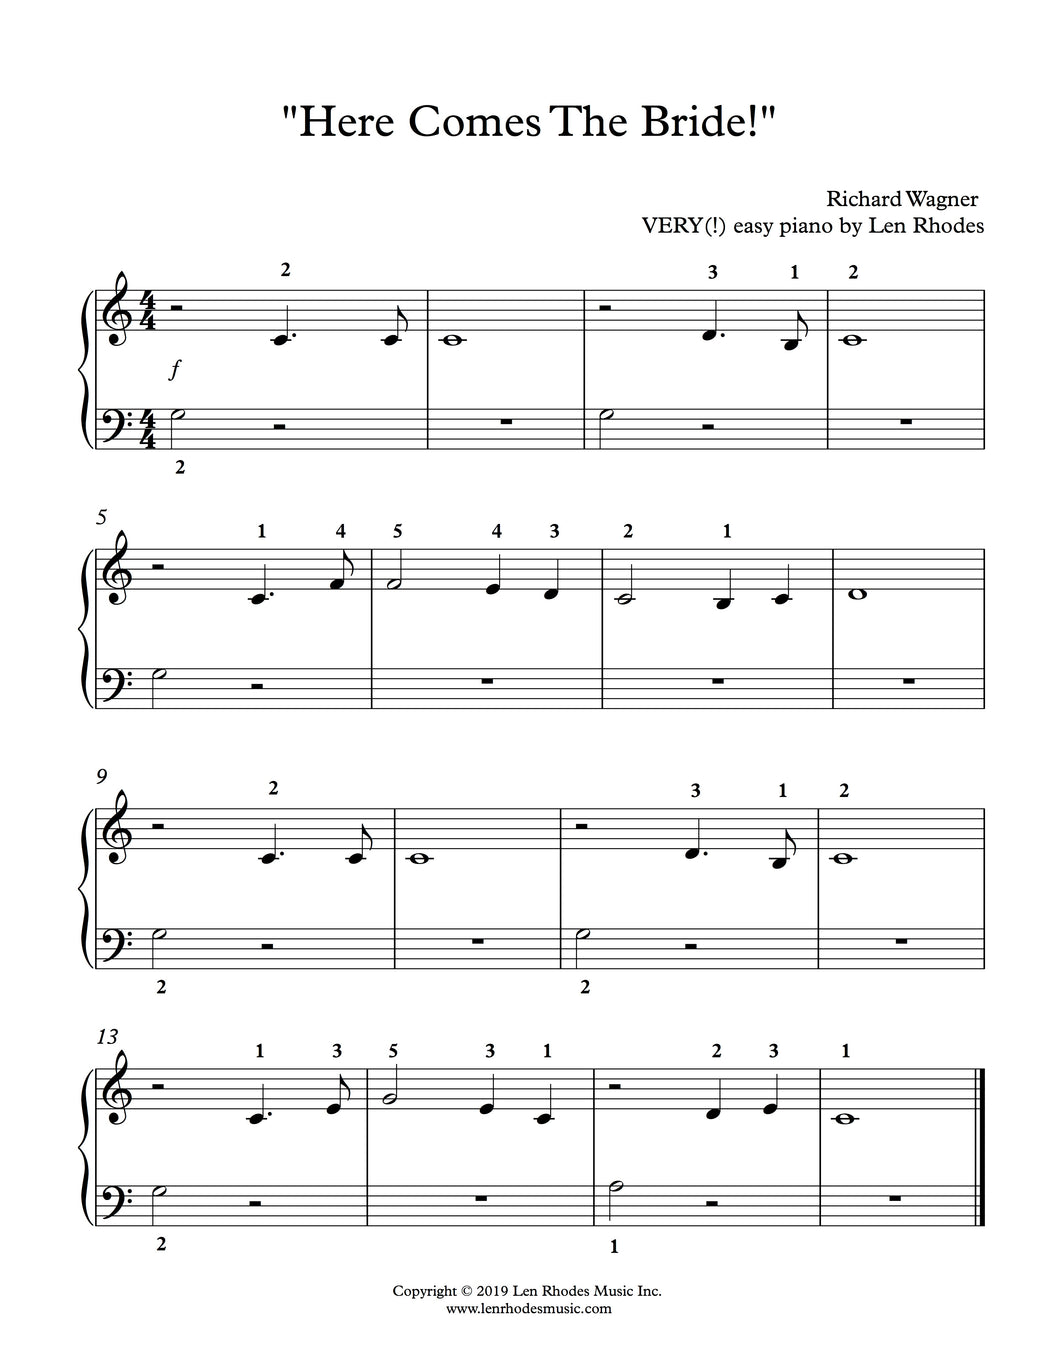 Bridal Chorus “Here Comes The Bride”, Wagner - very easy Piano